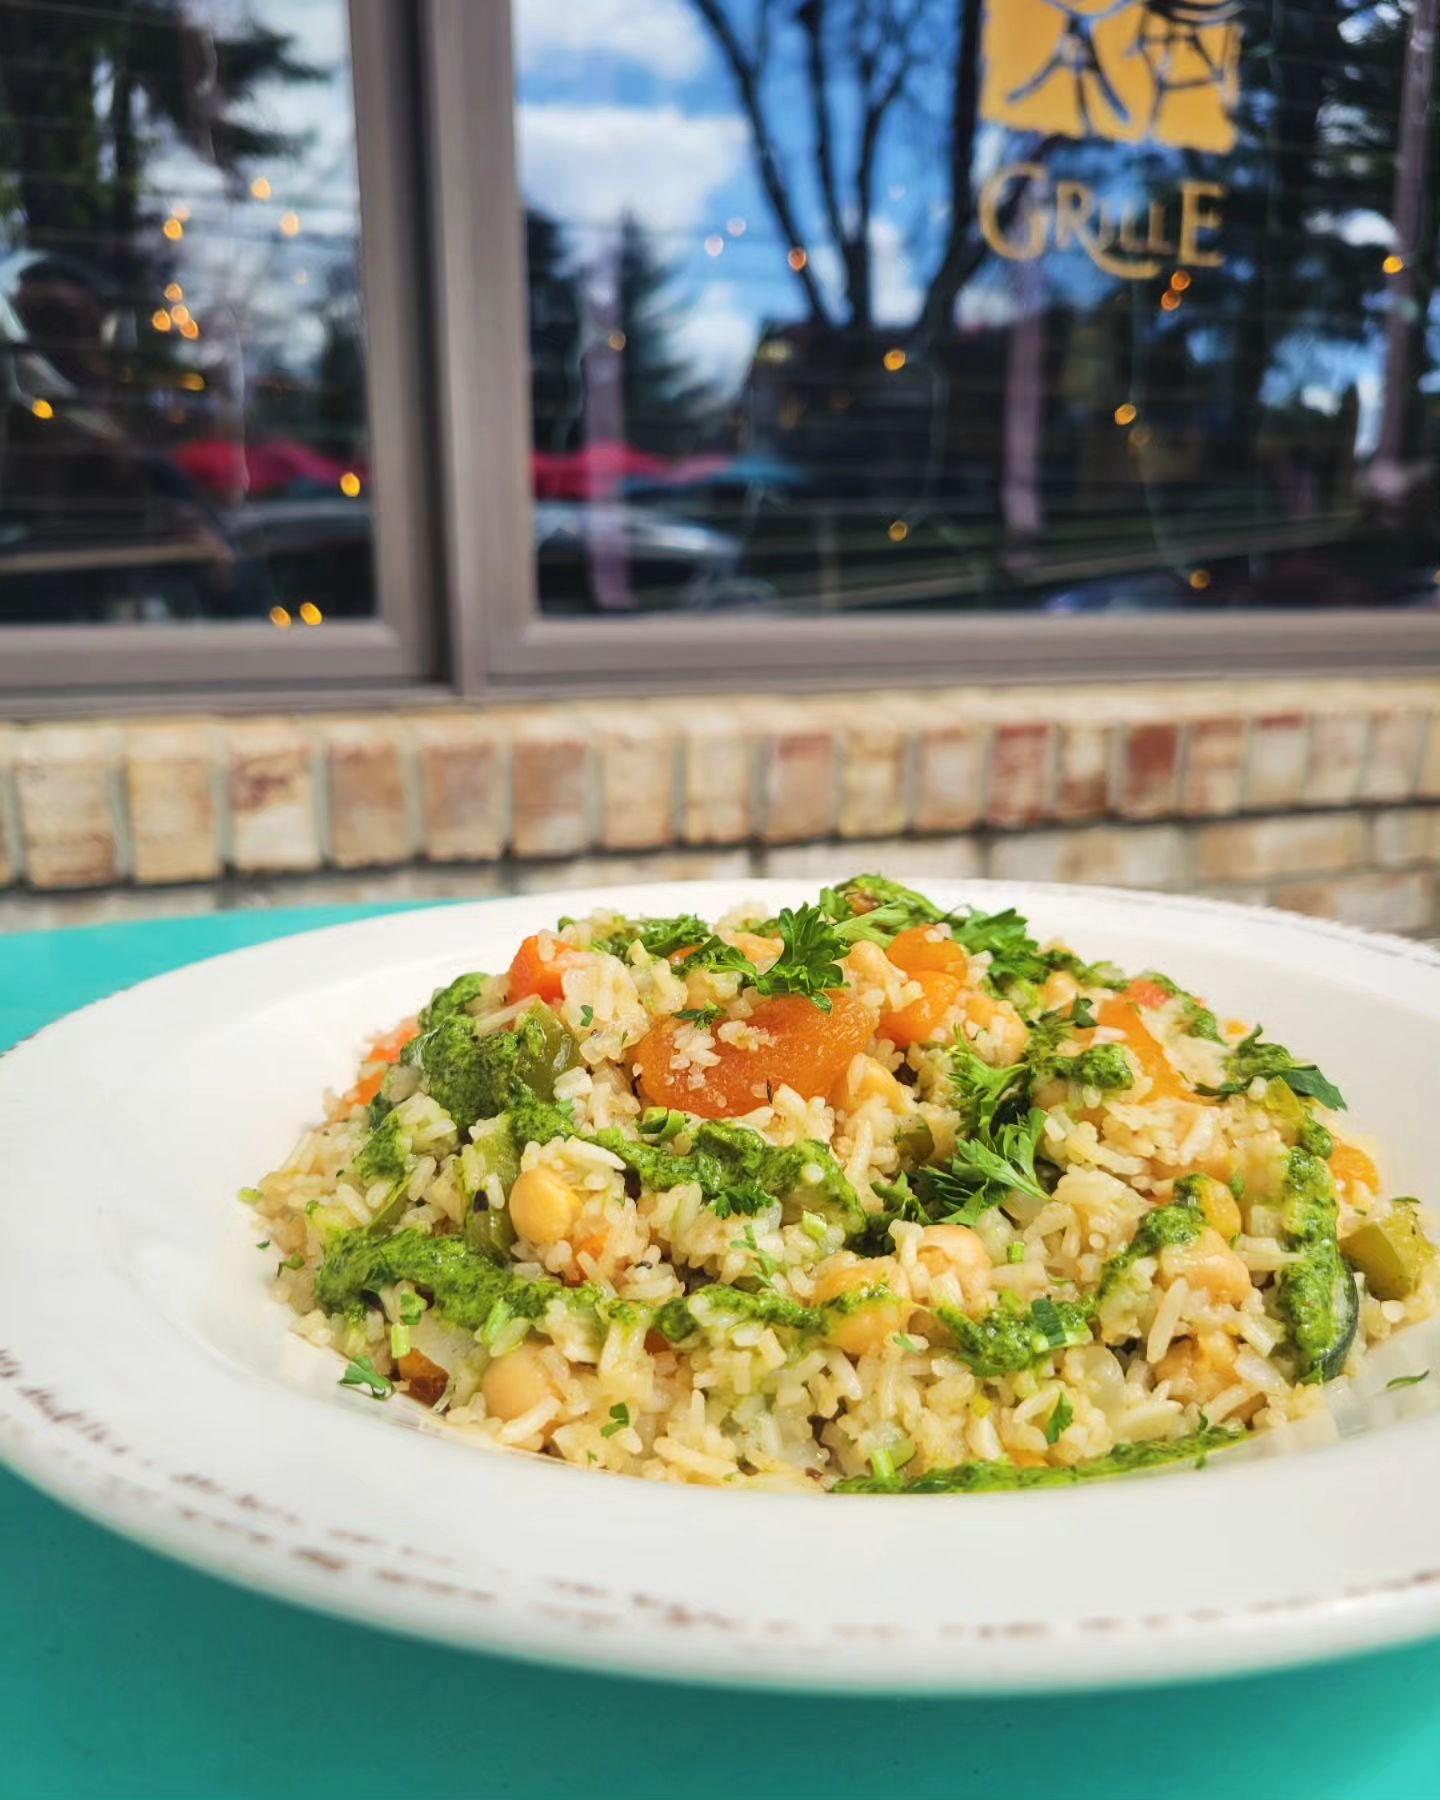 Our dinner special this weekend is perfect for these cool nights. Reminder that we're open tomorrow from 11:30am to 8:30pm with brunch specials and smashburgers ✨️

Vegan Biryani&mdash;basmati rice, veggies, ginger, garlic, warm spices, chickpeas, dr